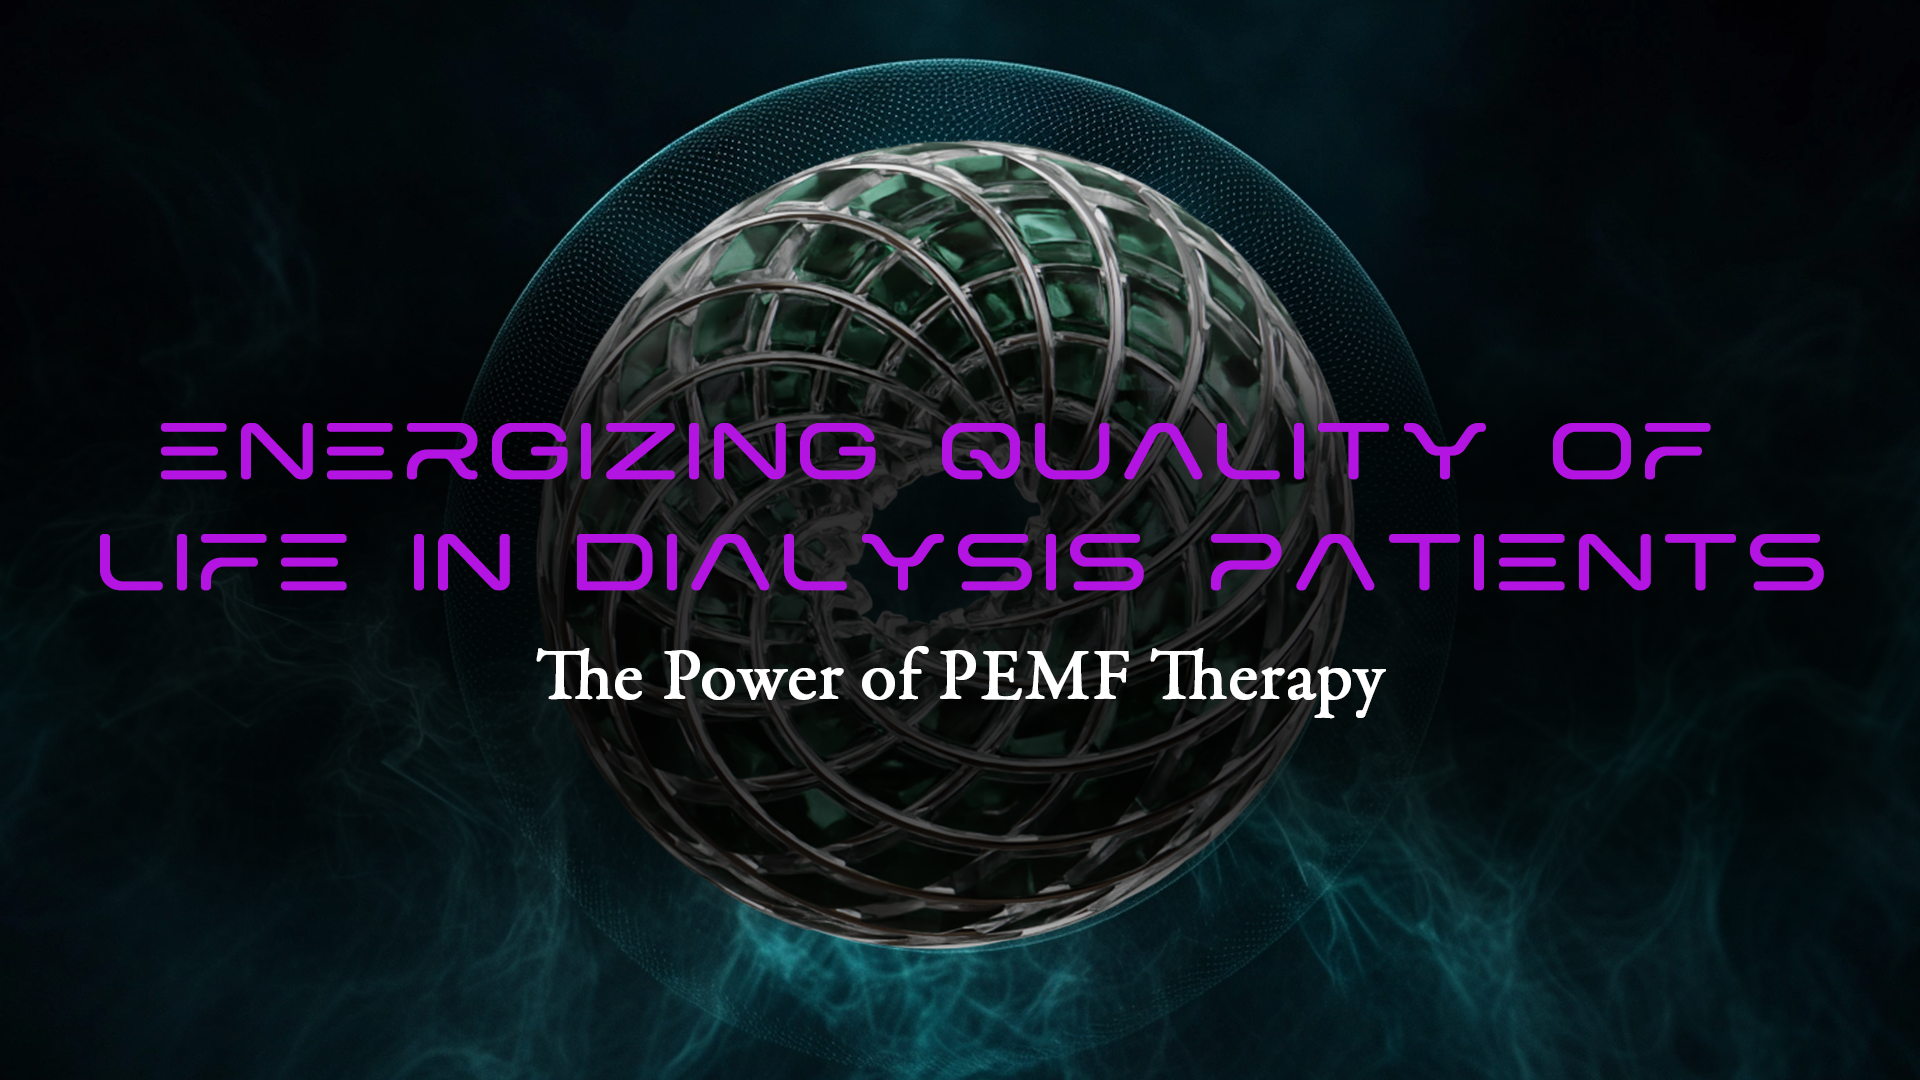 Energizing Quality of Life in Dialysis Patients: The Power of PEMF Therapy